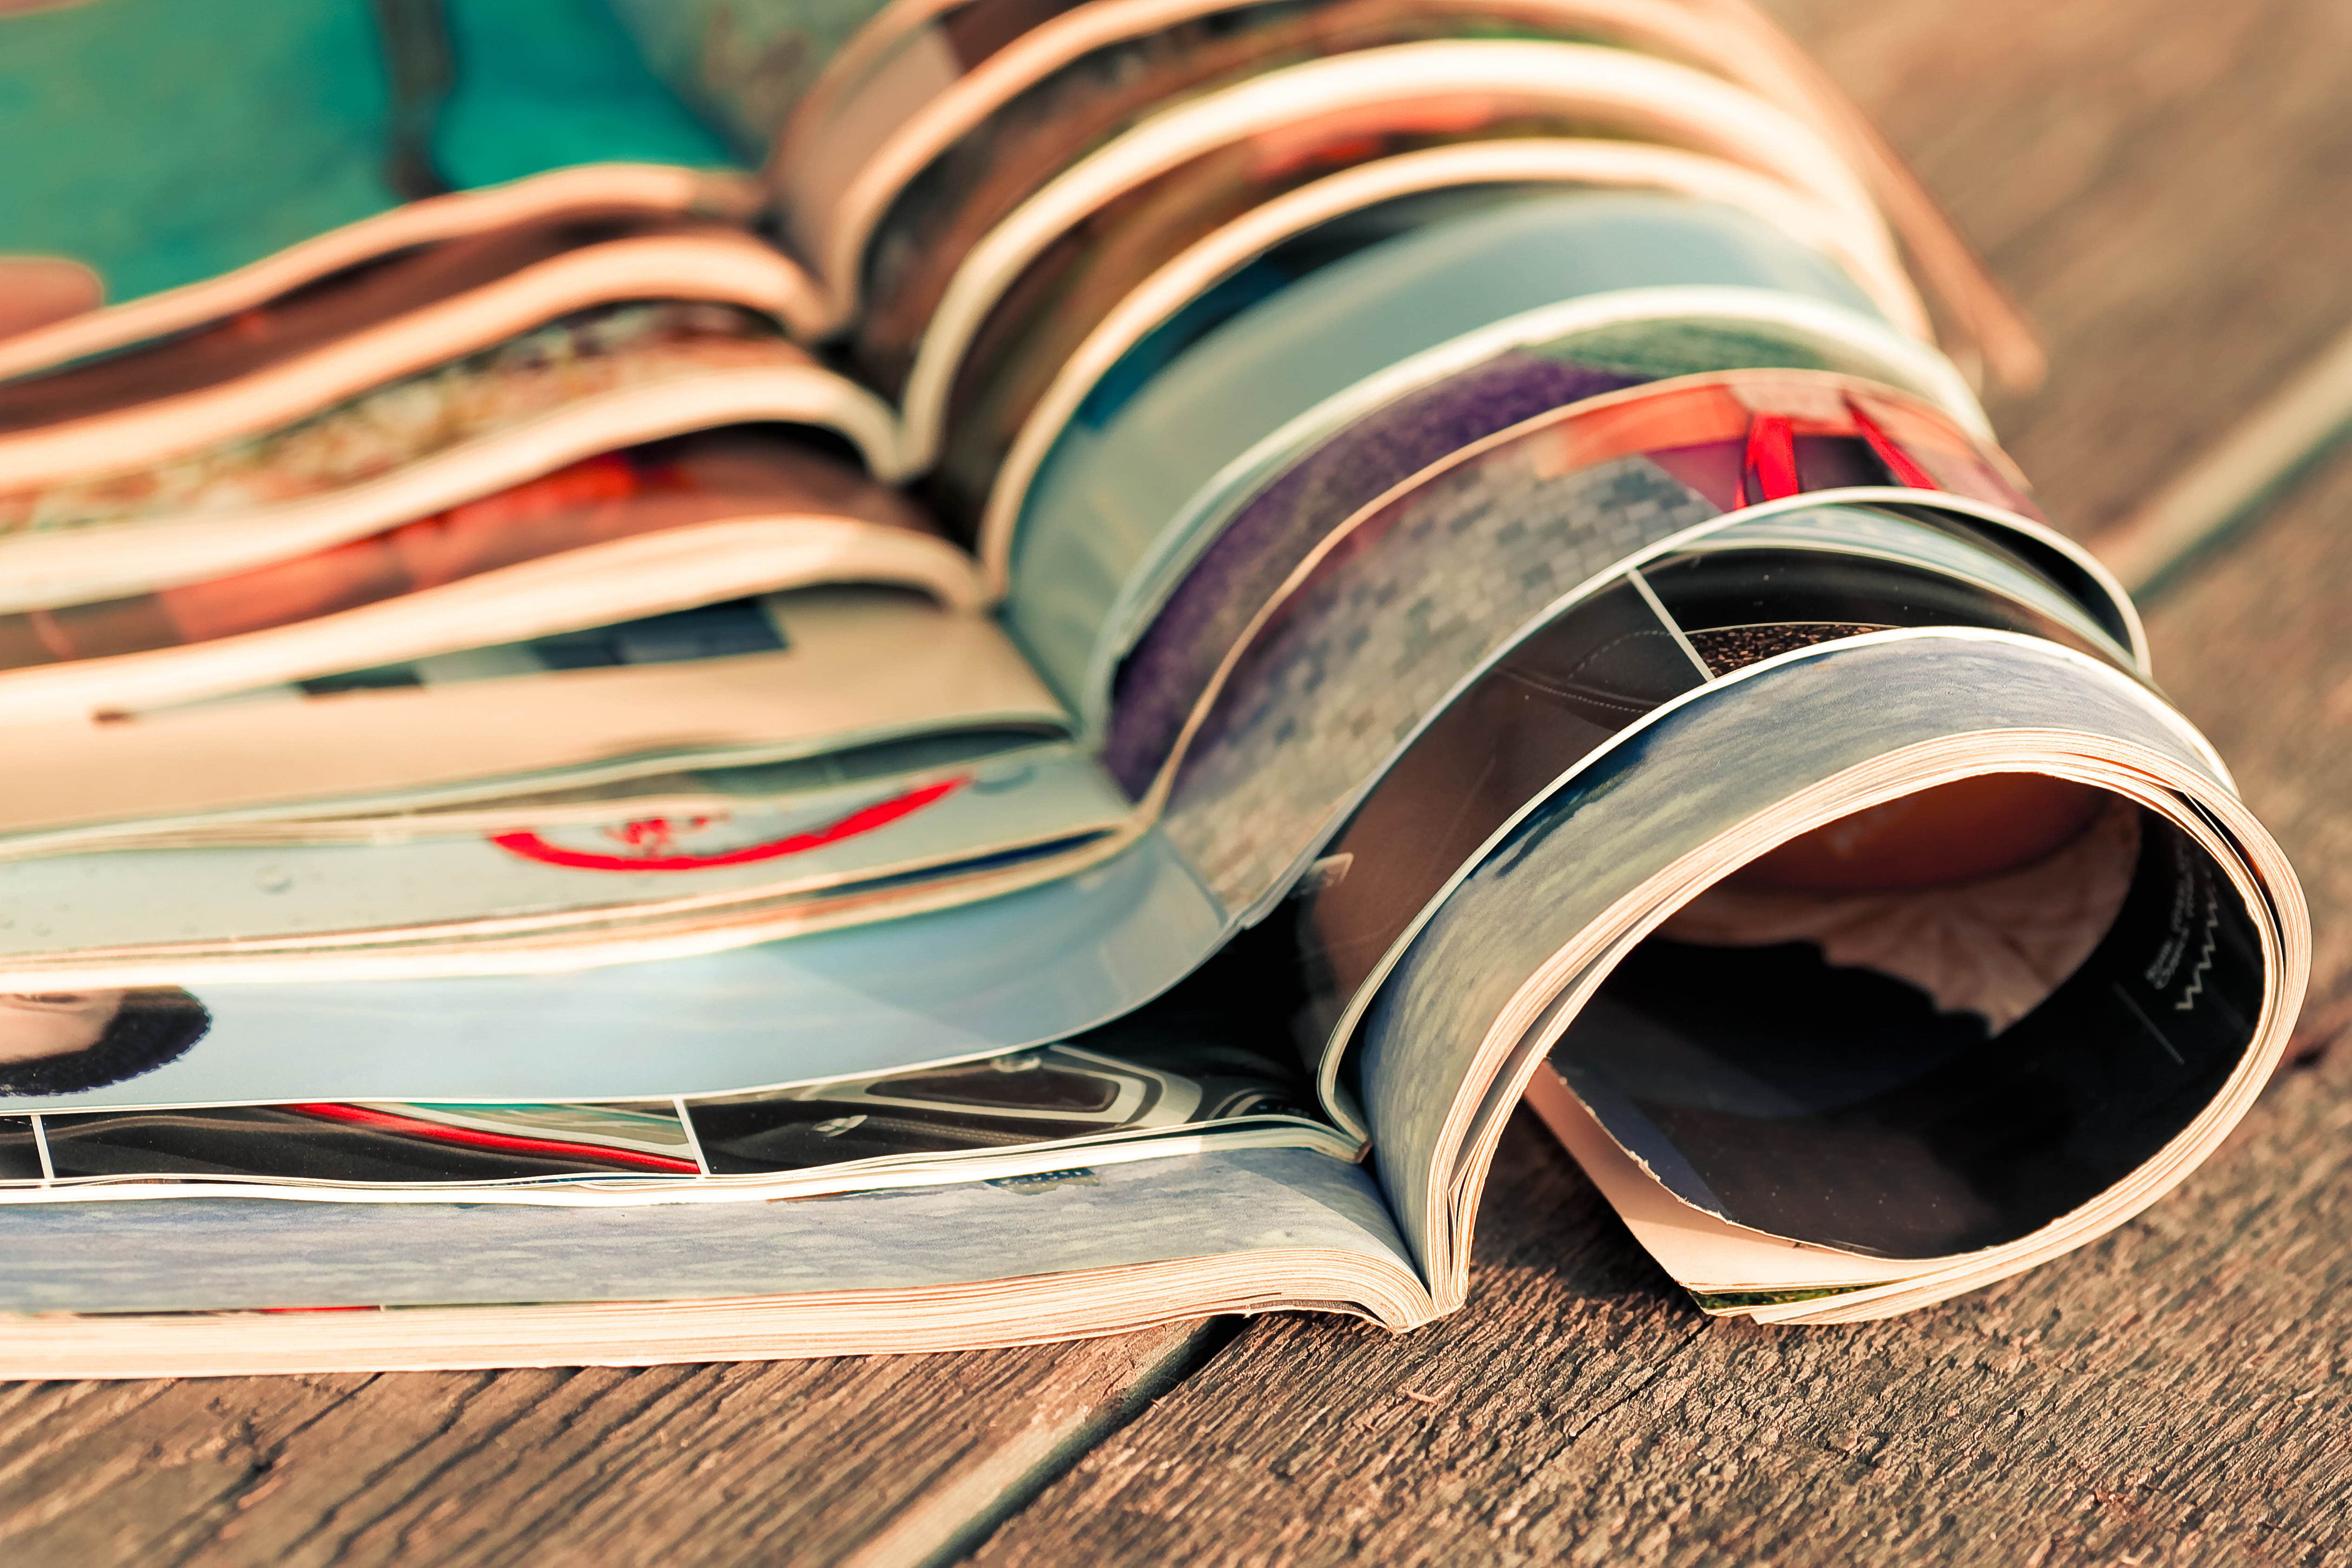 The Top 10 U.S. Magazines by Circulation